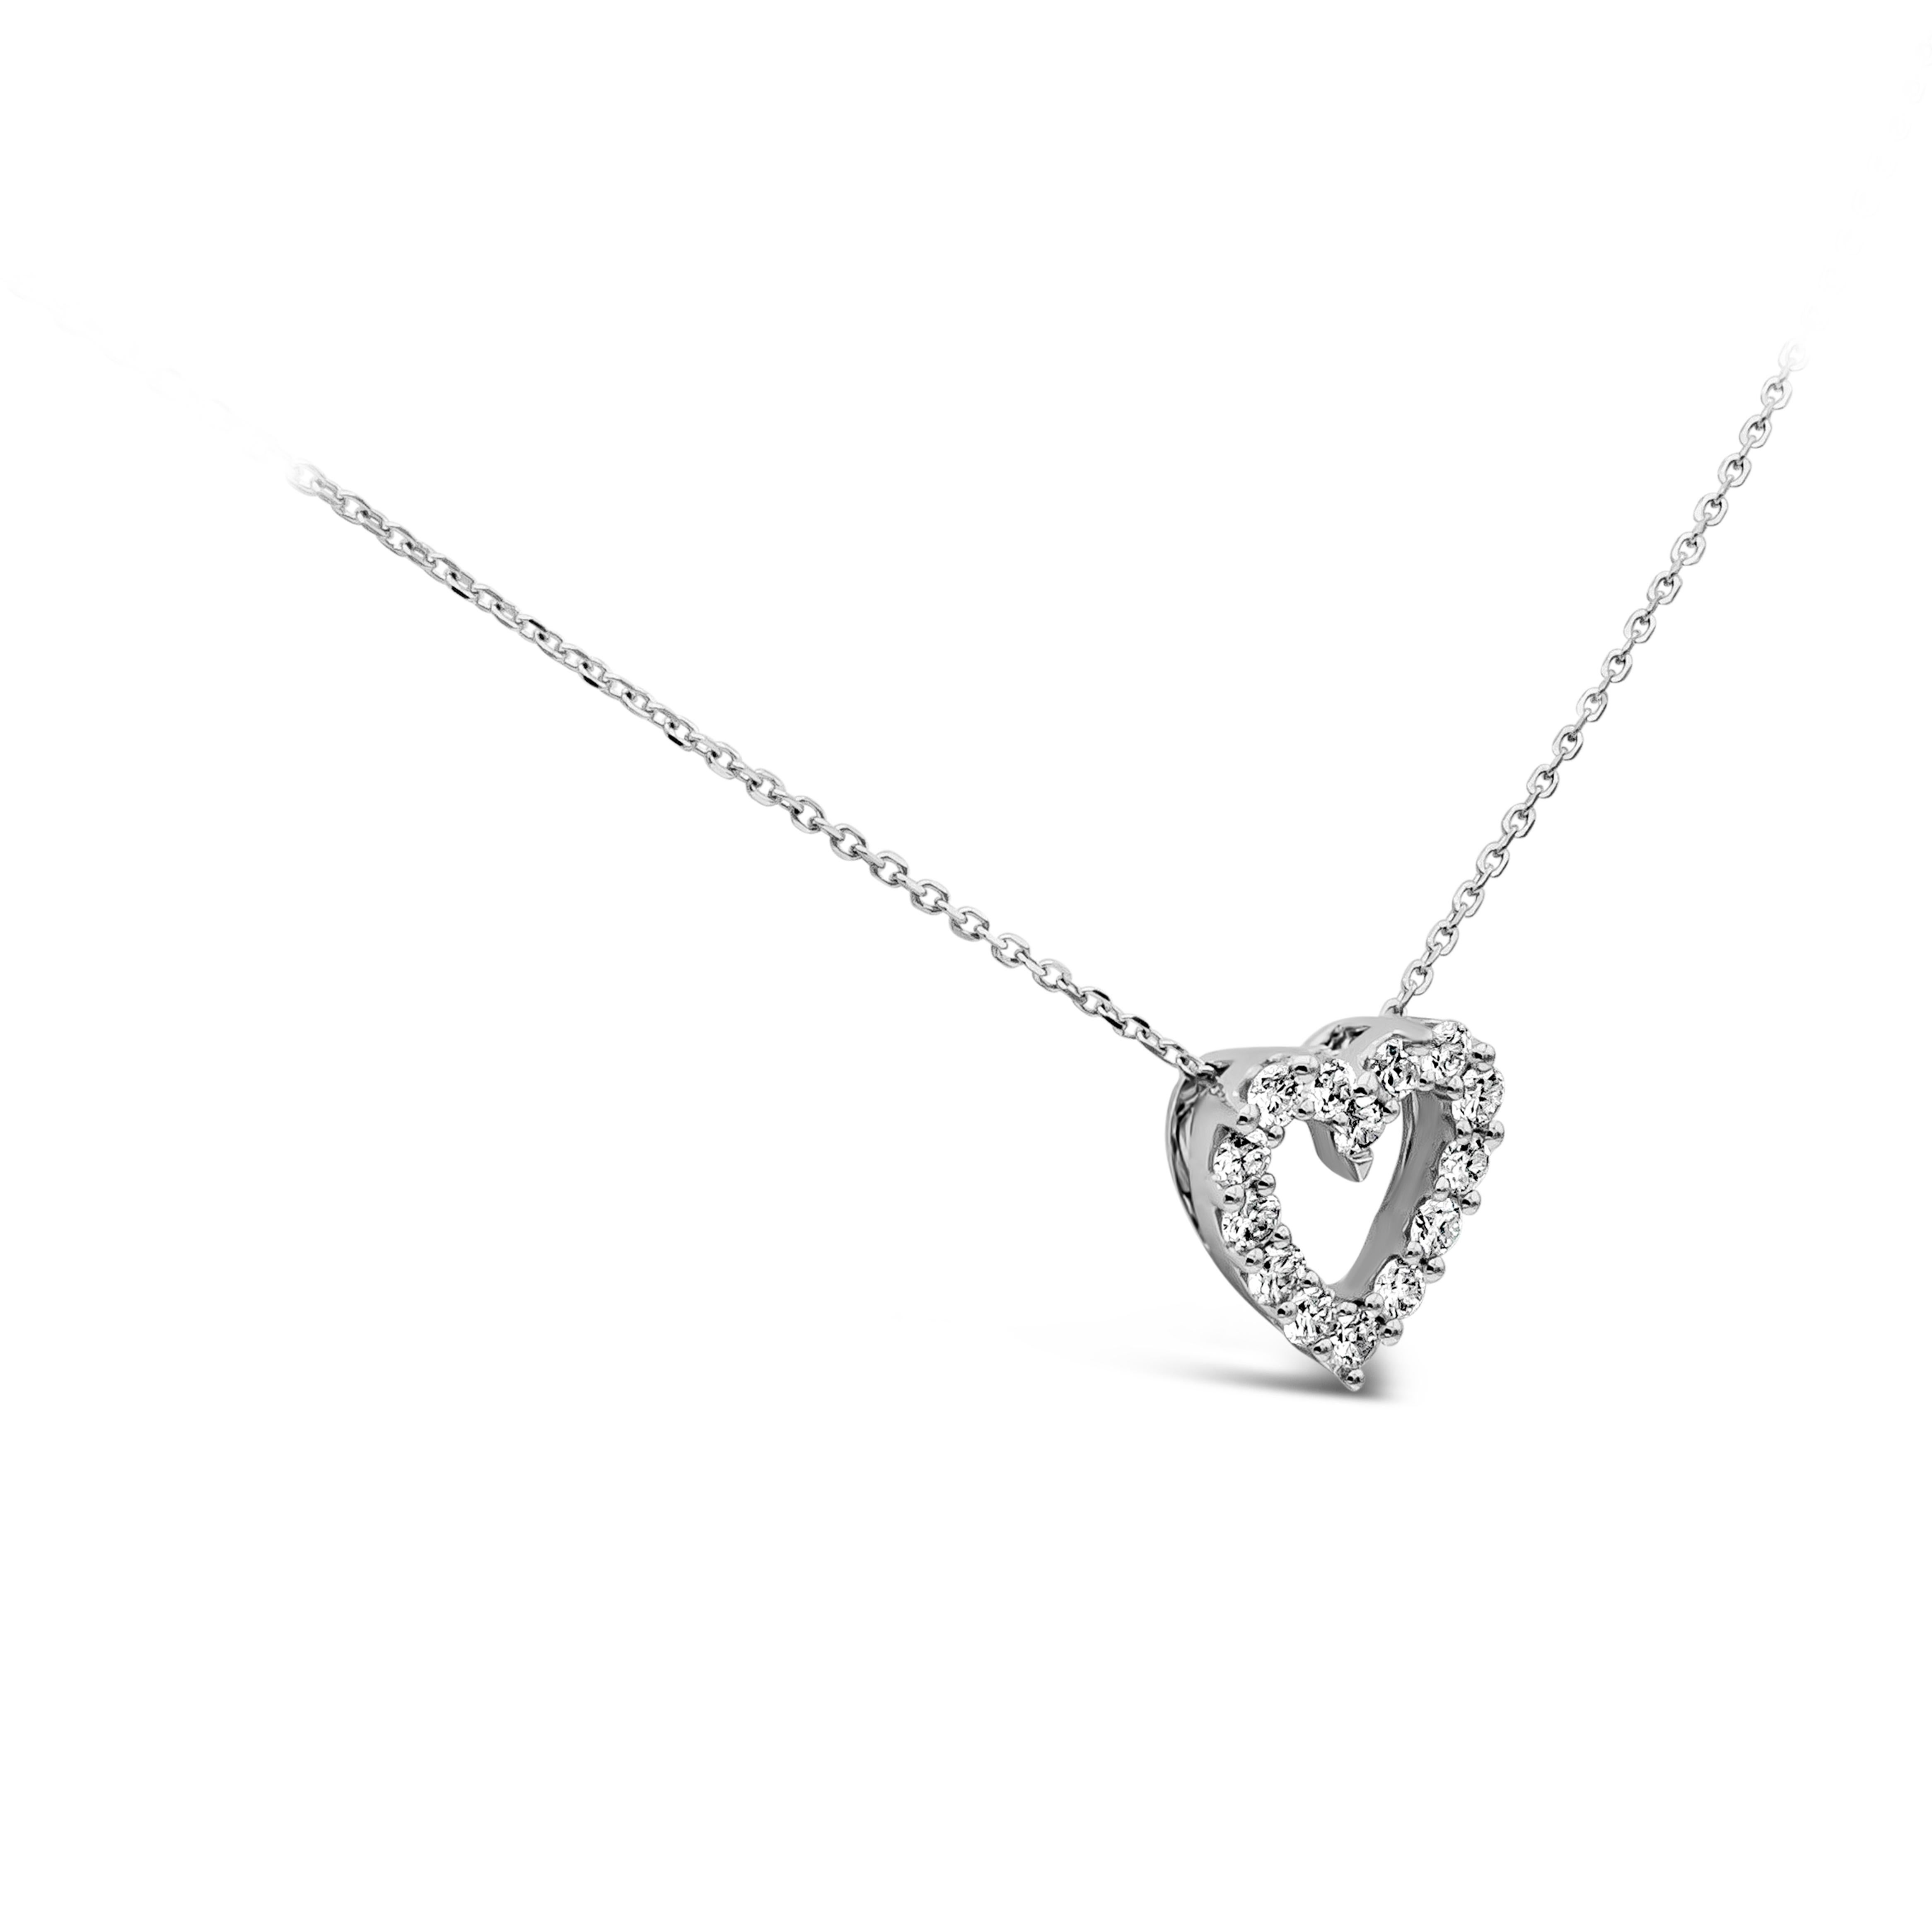 A simple pendant necklace showcasing a row of 14 round brilliant diamonds, set in an open-work heart shape mounting made in 18k white gold. Diamonds weigh 0.53 carats total, G color, VS/SI clarity. Suspended on a 16 inch white gold chain. 

Style